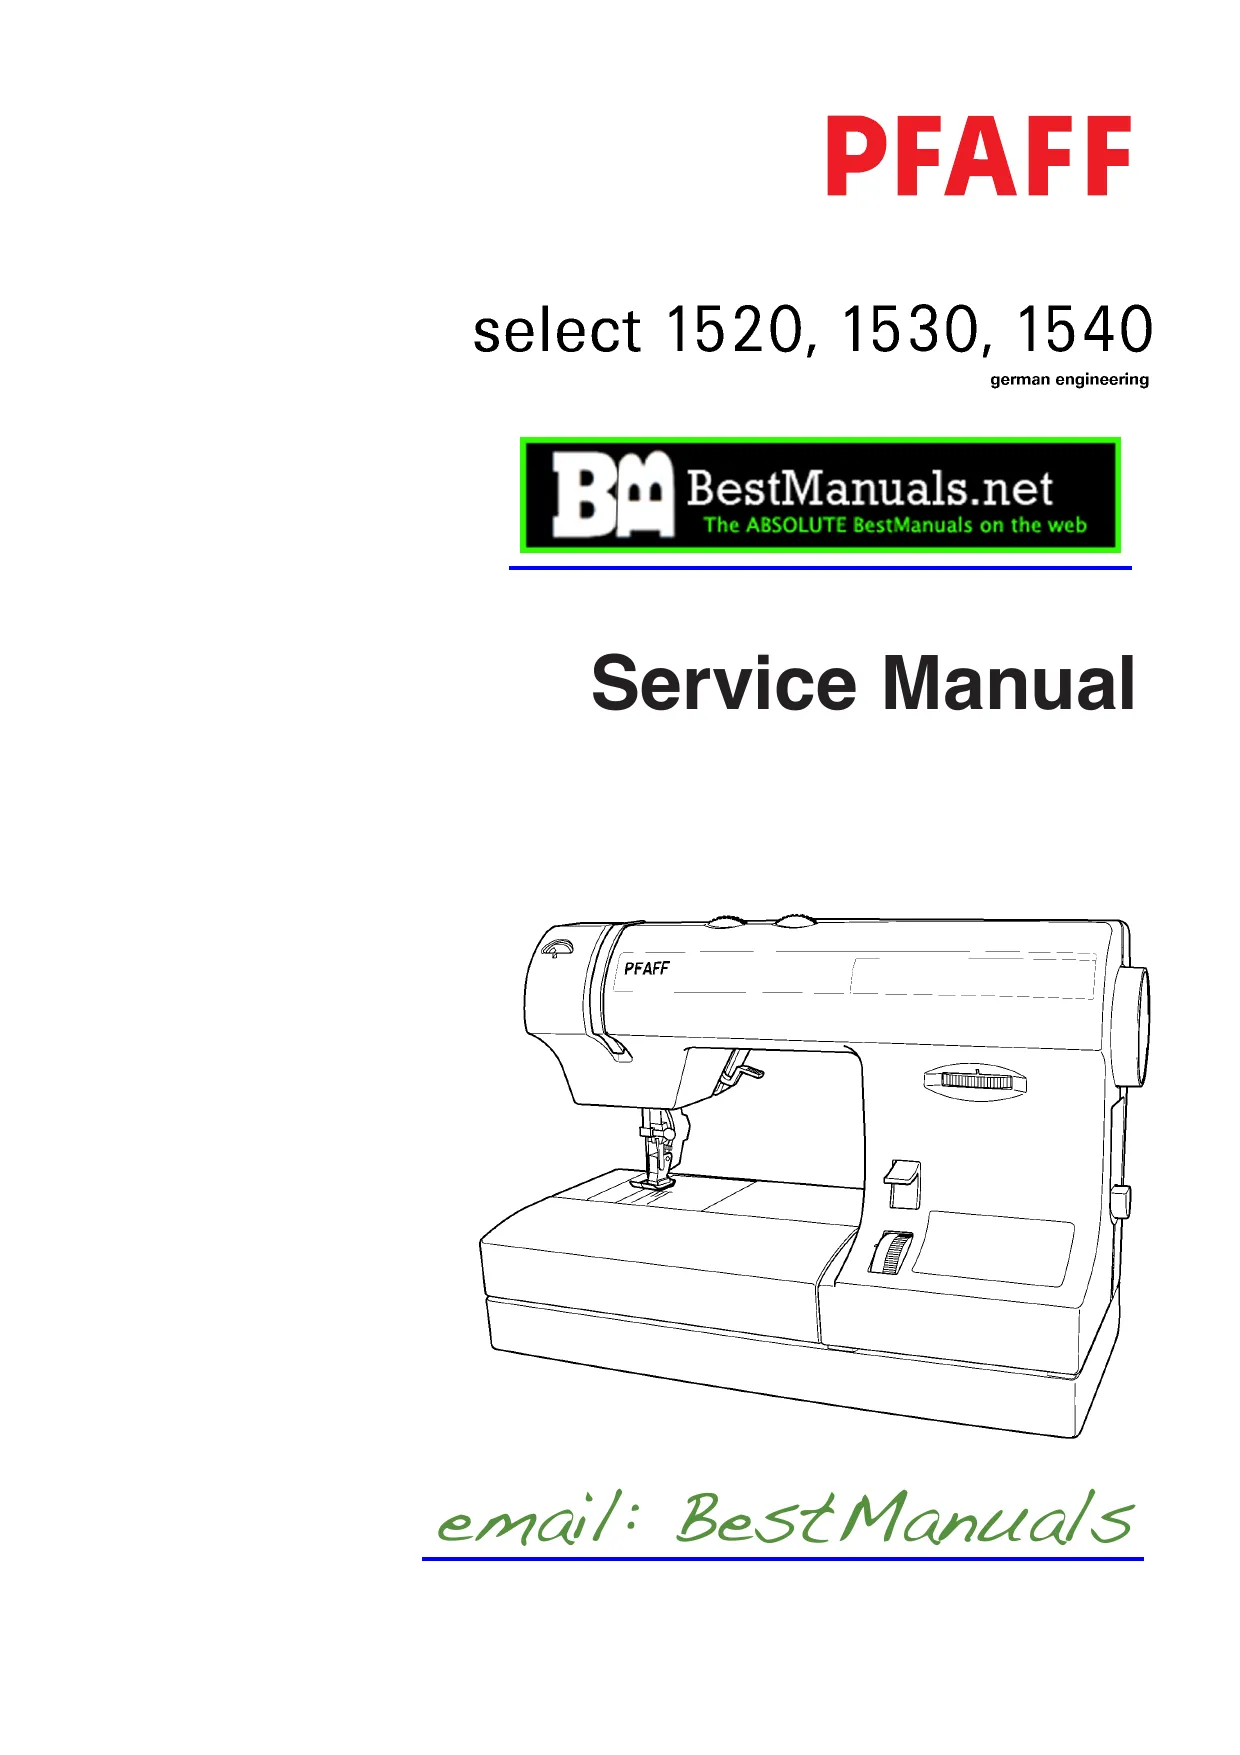 Pfaff Select 1520, 1530 & 1540 sewing machine parts list and service manual Preview image 1